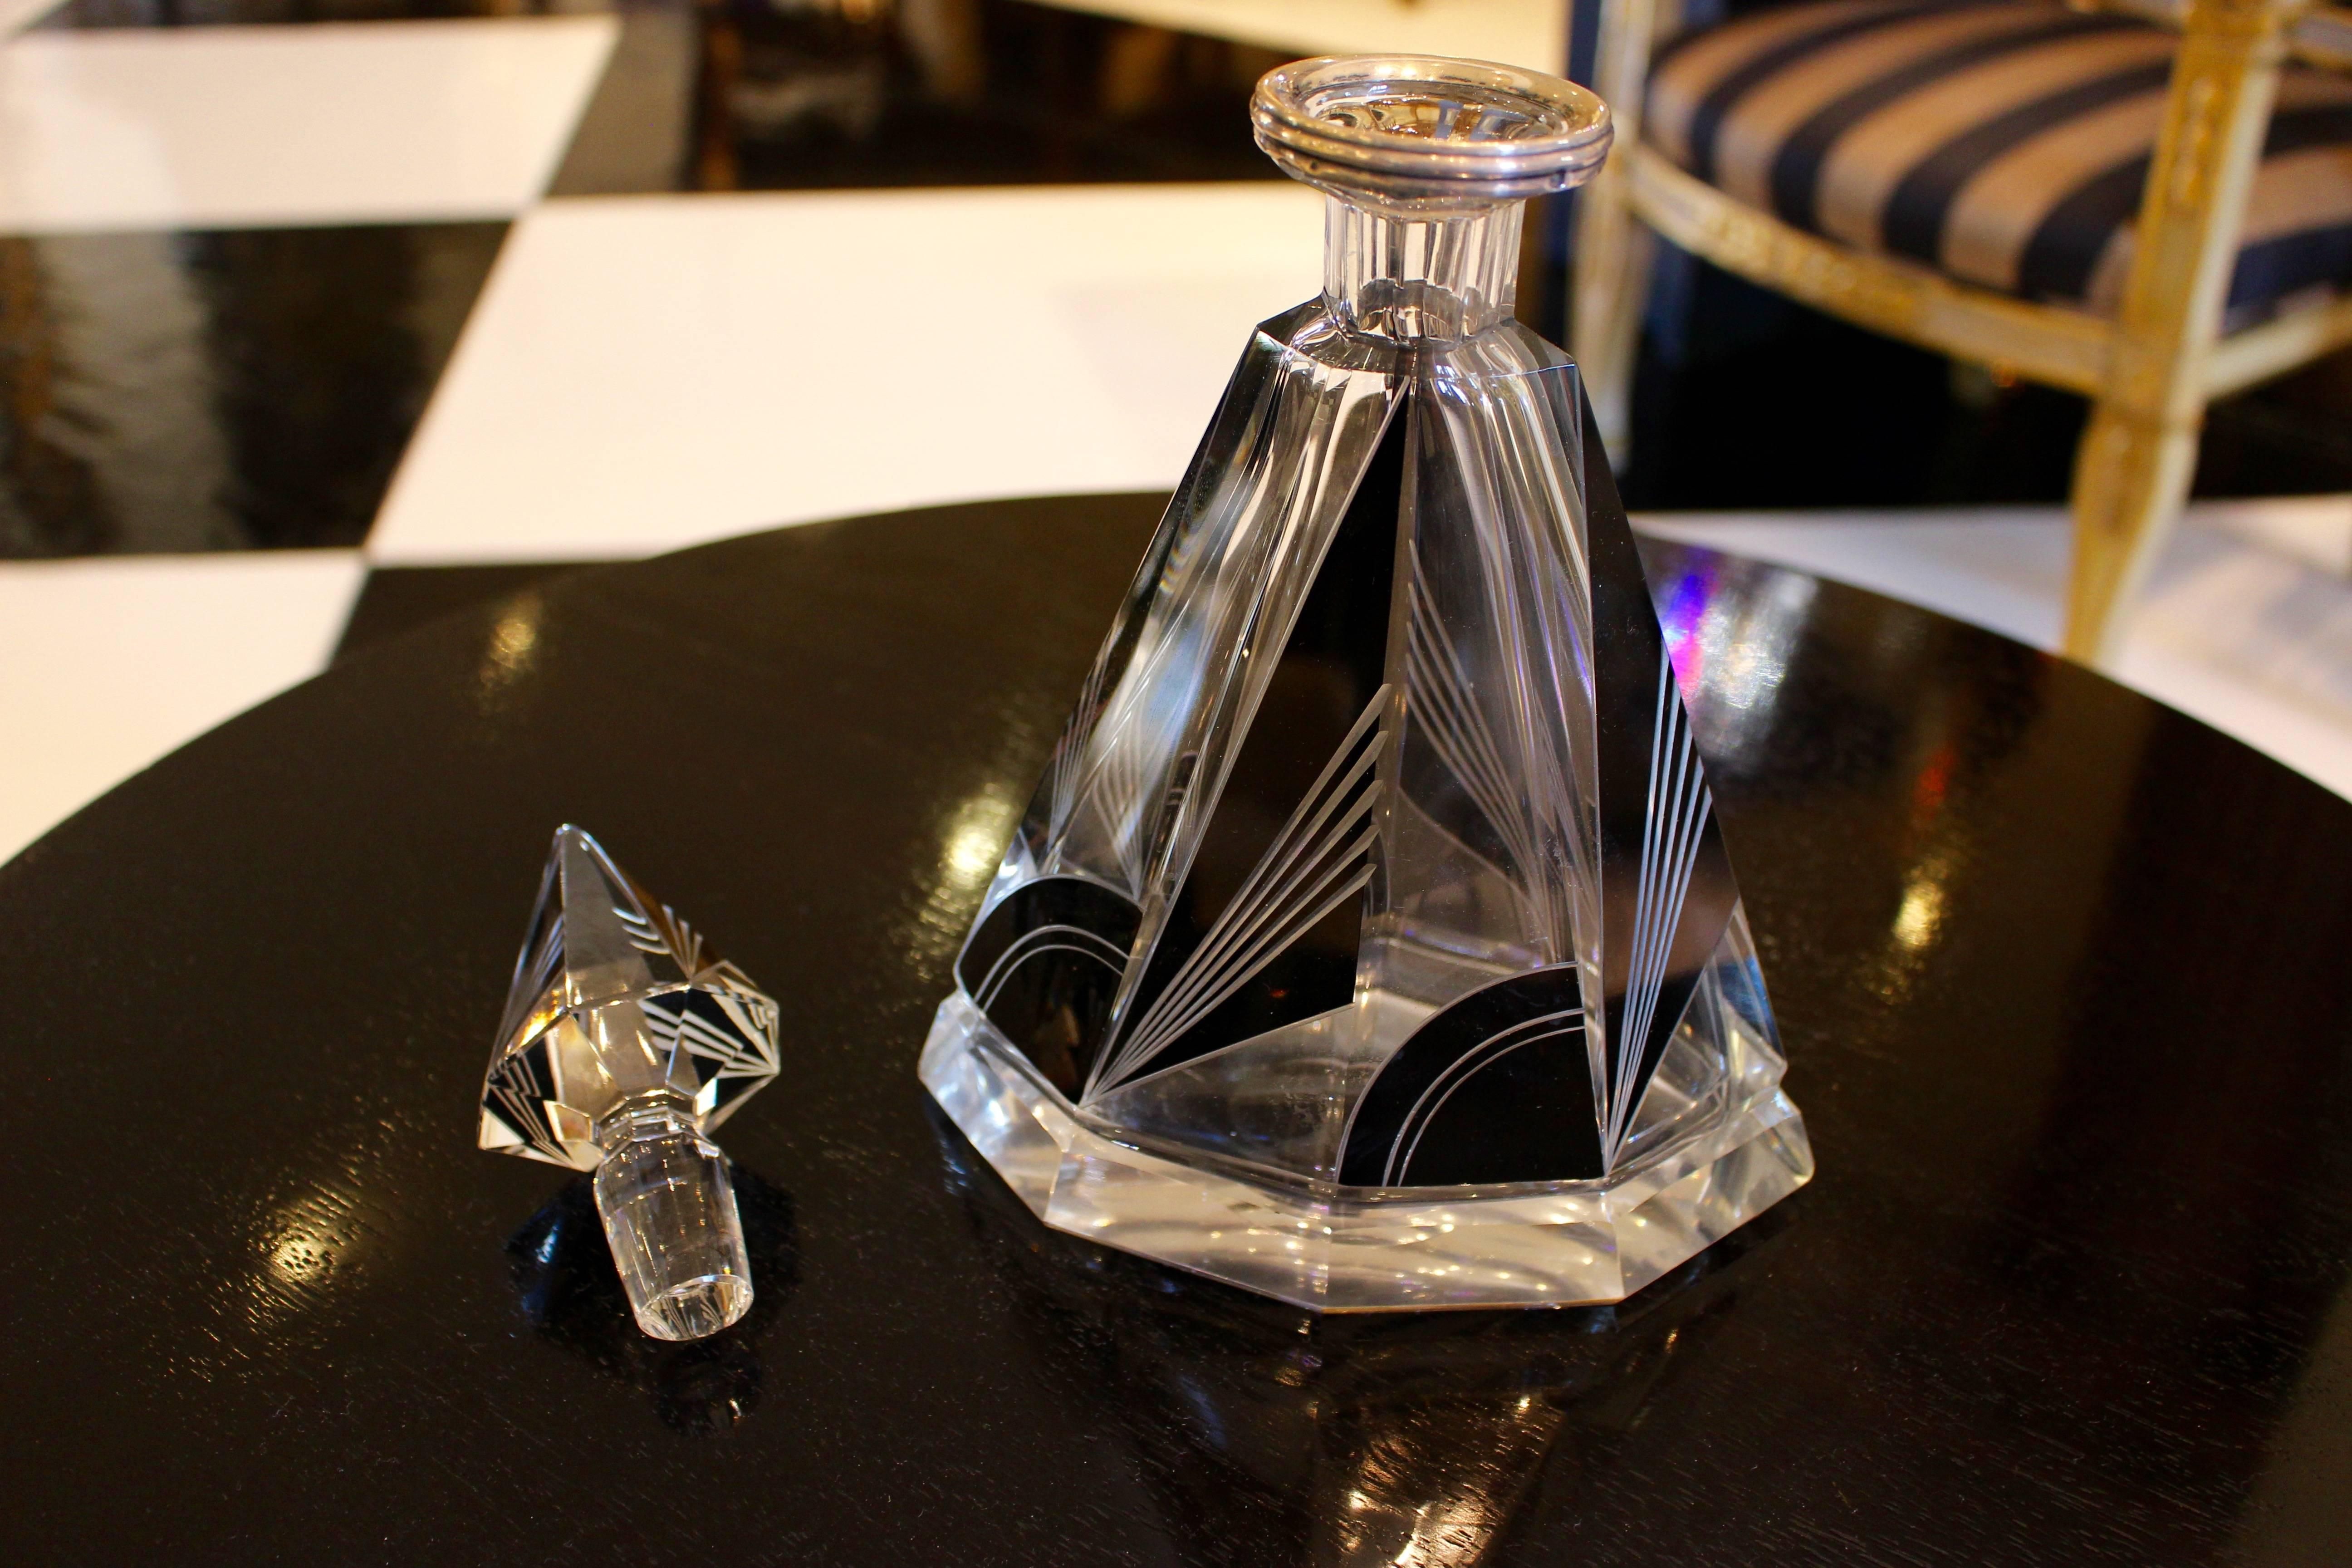 A rare surviving Bohemian crystal and silver decanter, depicts the art style of the Art Deco period.